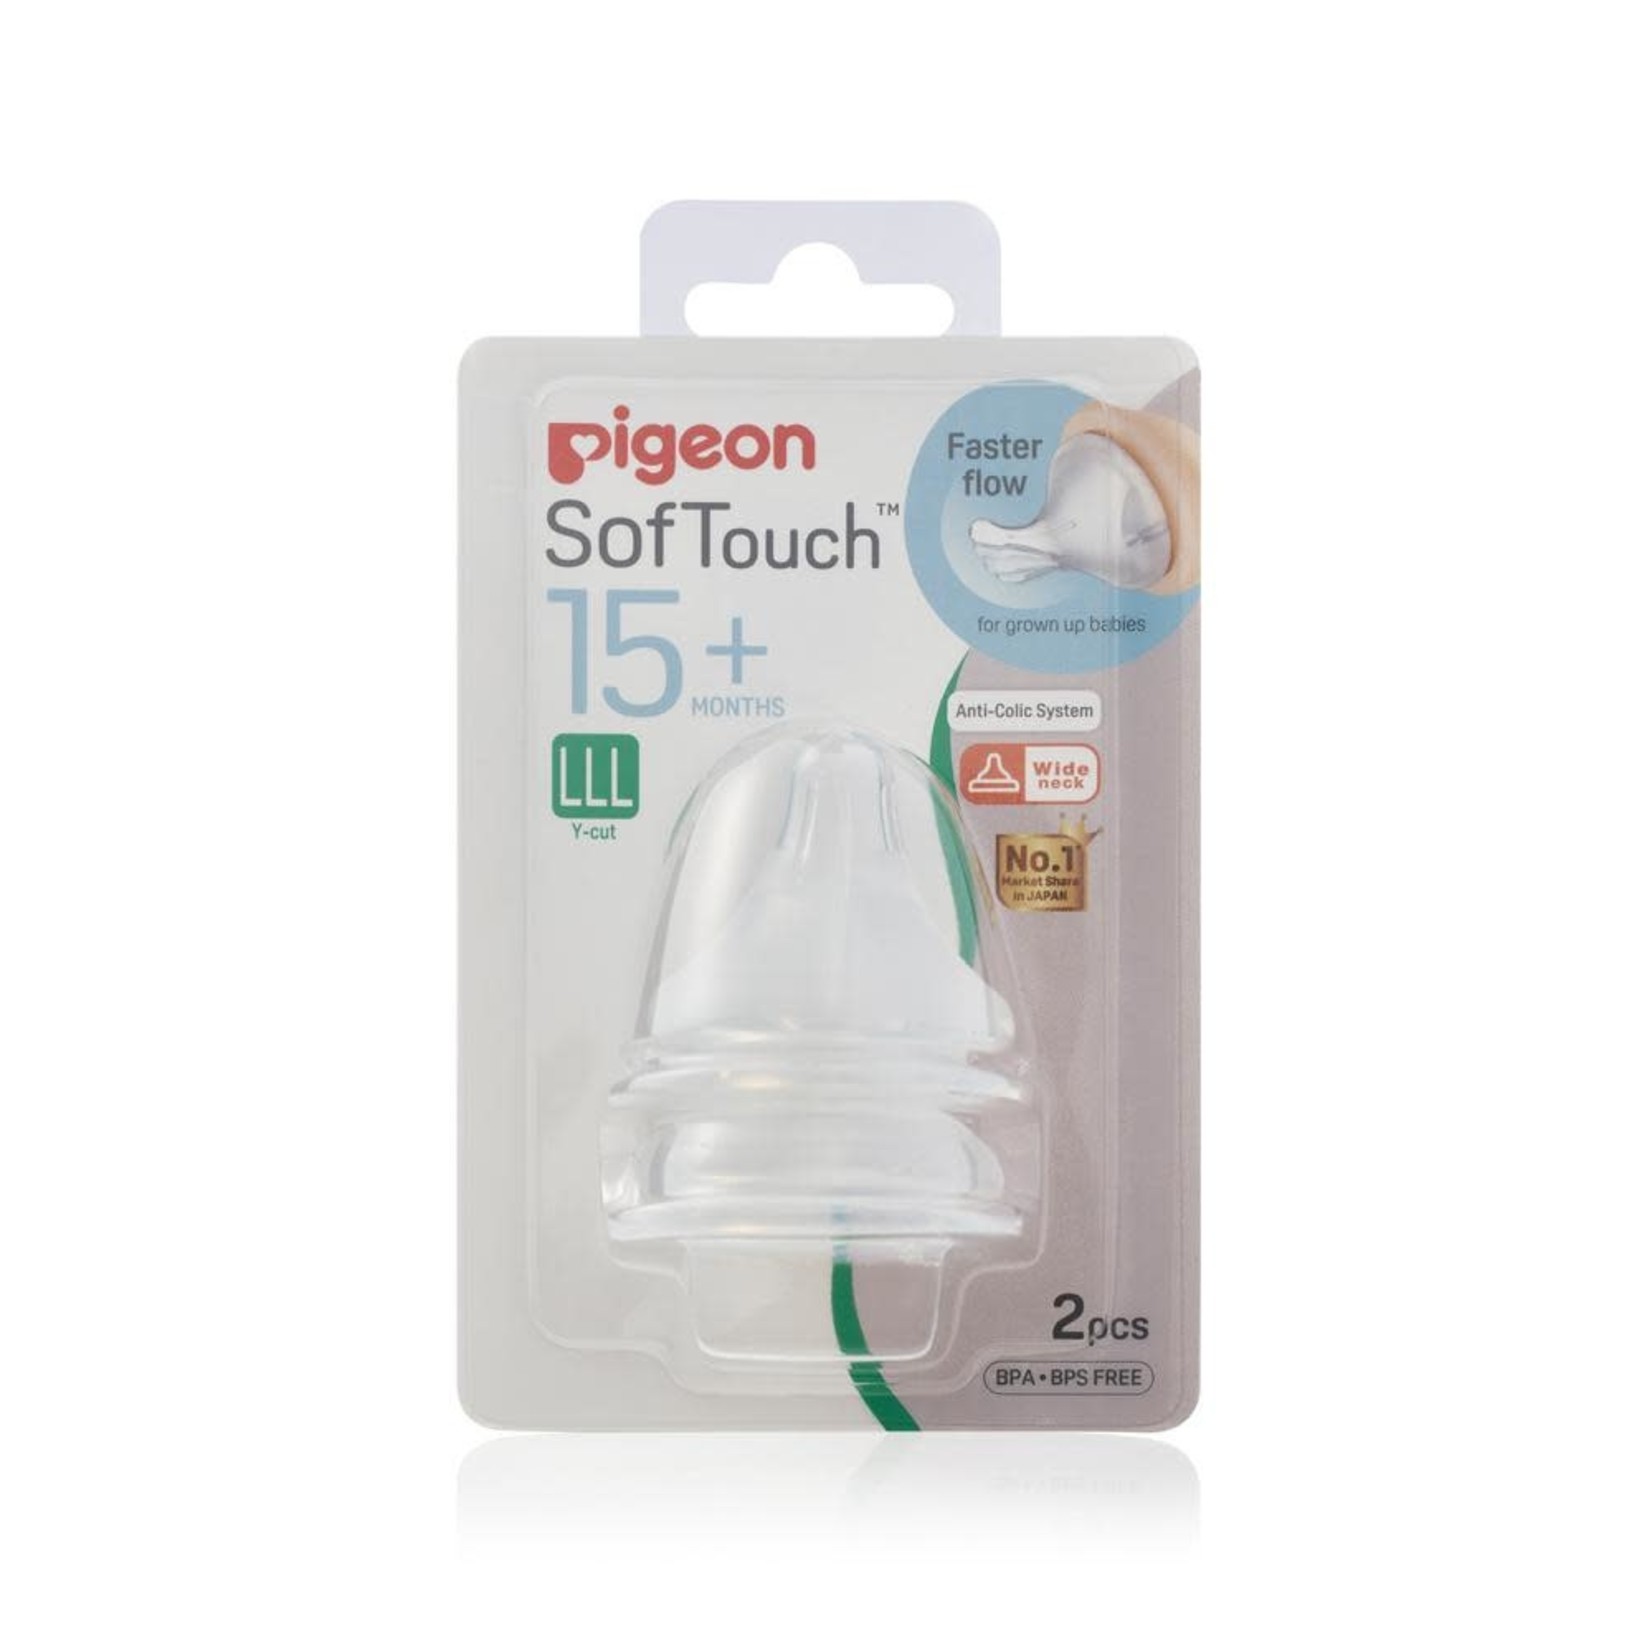 Pigeon SofTouch™ Peristaltic PLUS 2pk Teat (LLL)